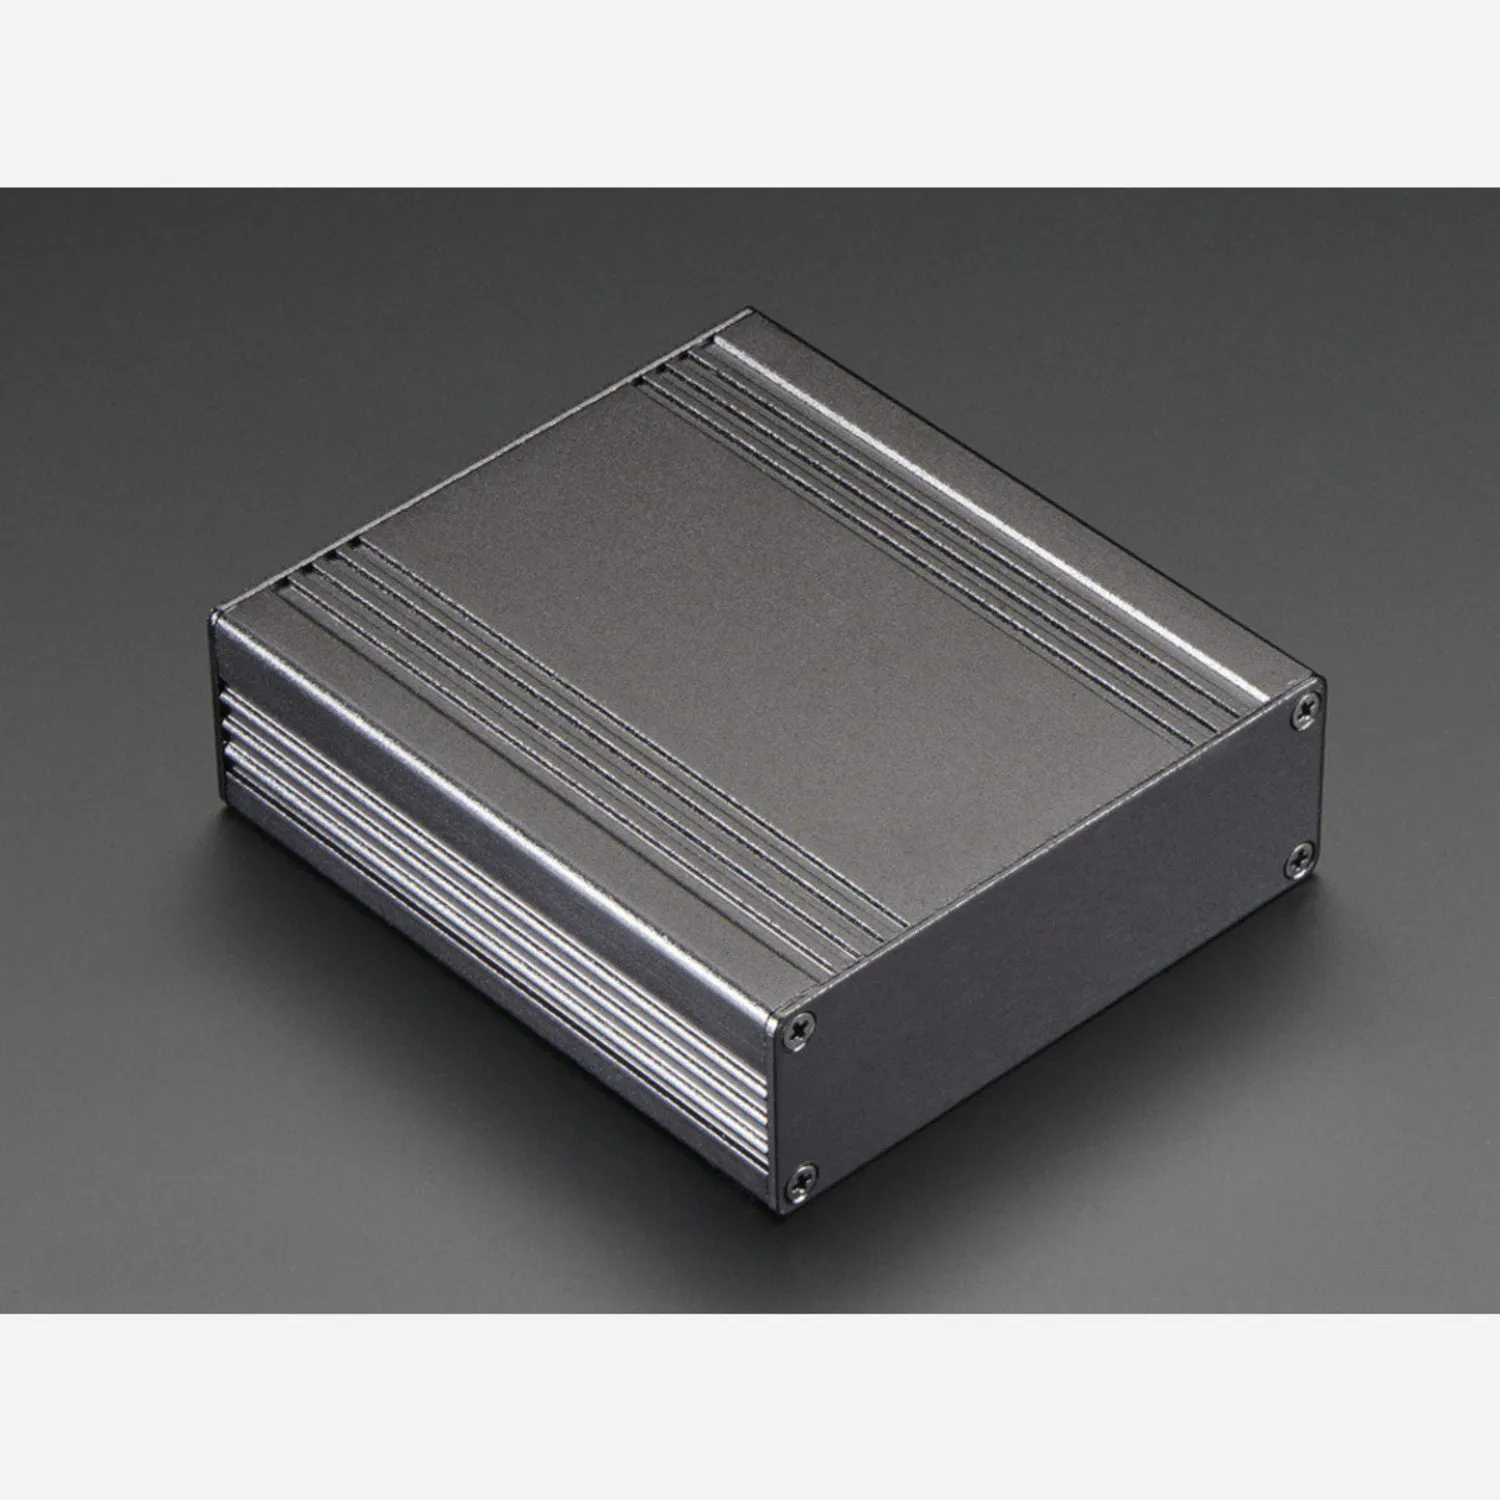 Photo of Extruded Aluminum Box - 94mm x 83mm x 30mm